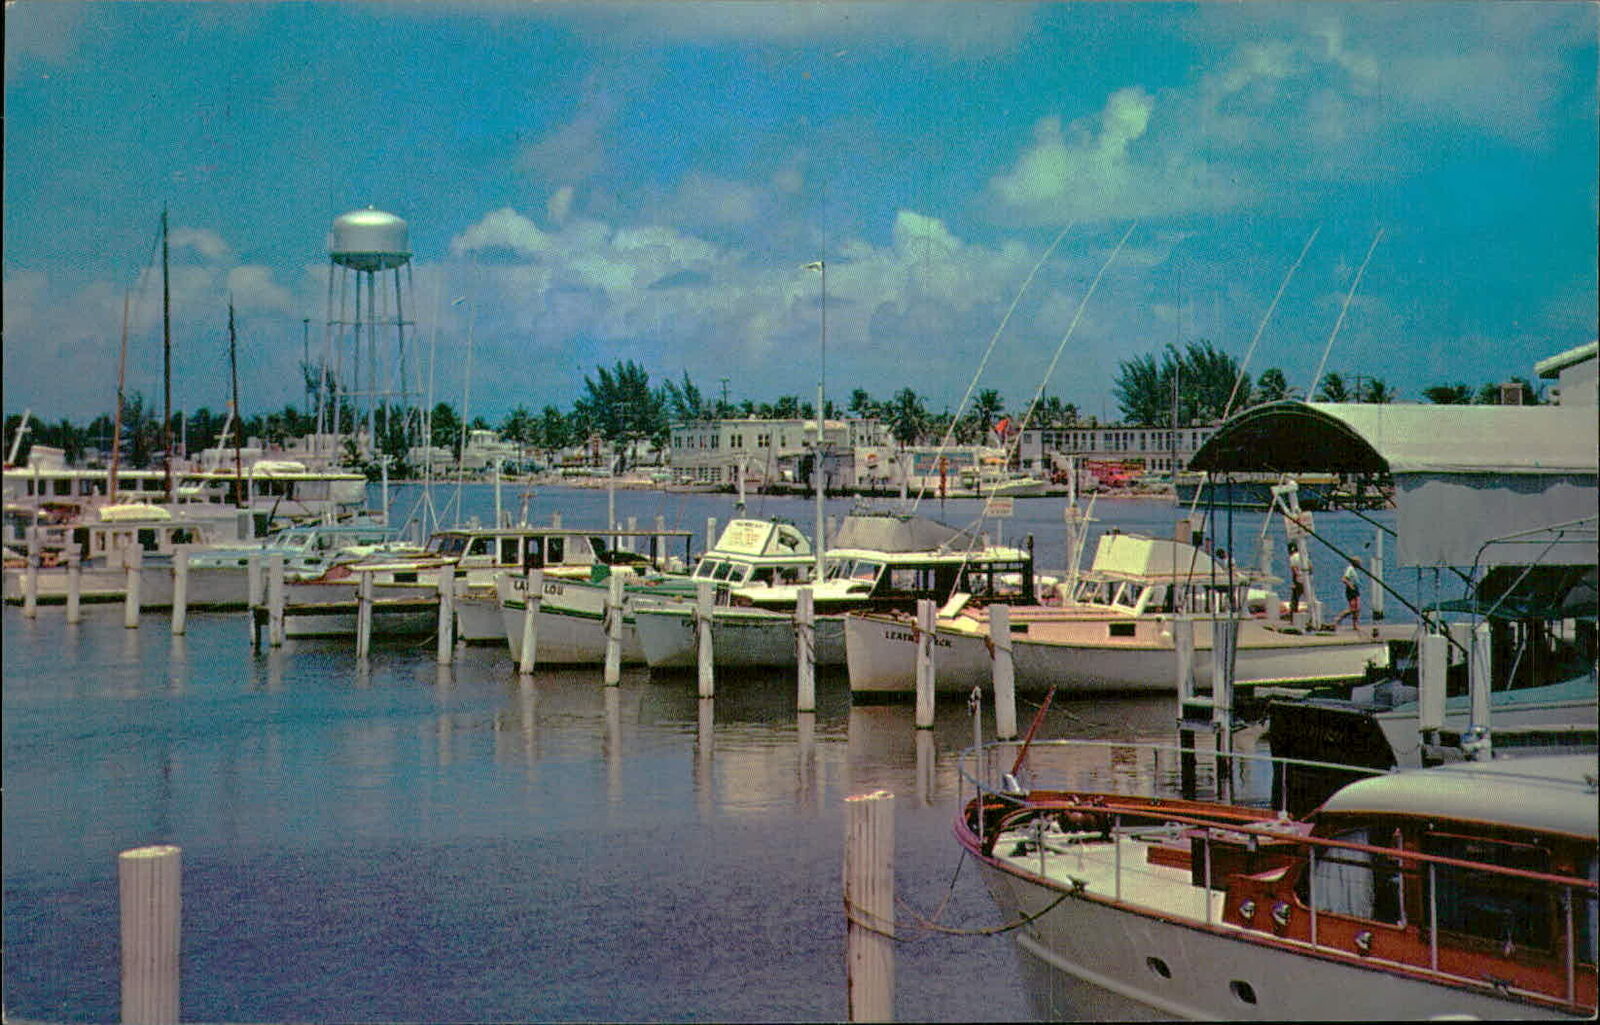 Postcard: FAMOUS YACHT BASIN AT HOLLYWOOD-BY-THE-SEA, FLORIDA